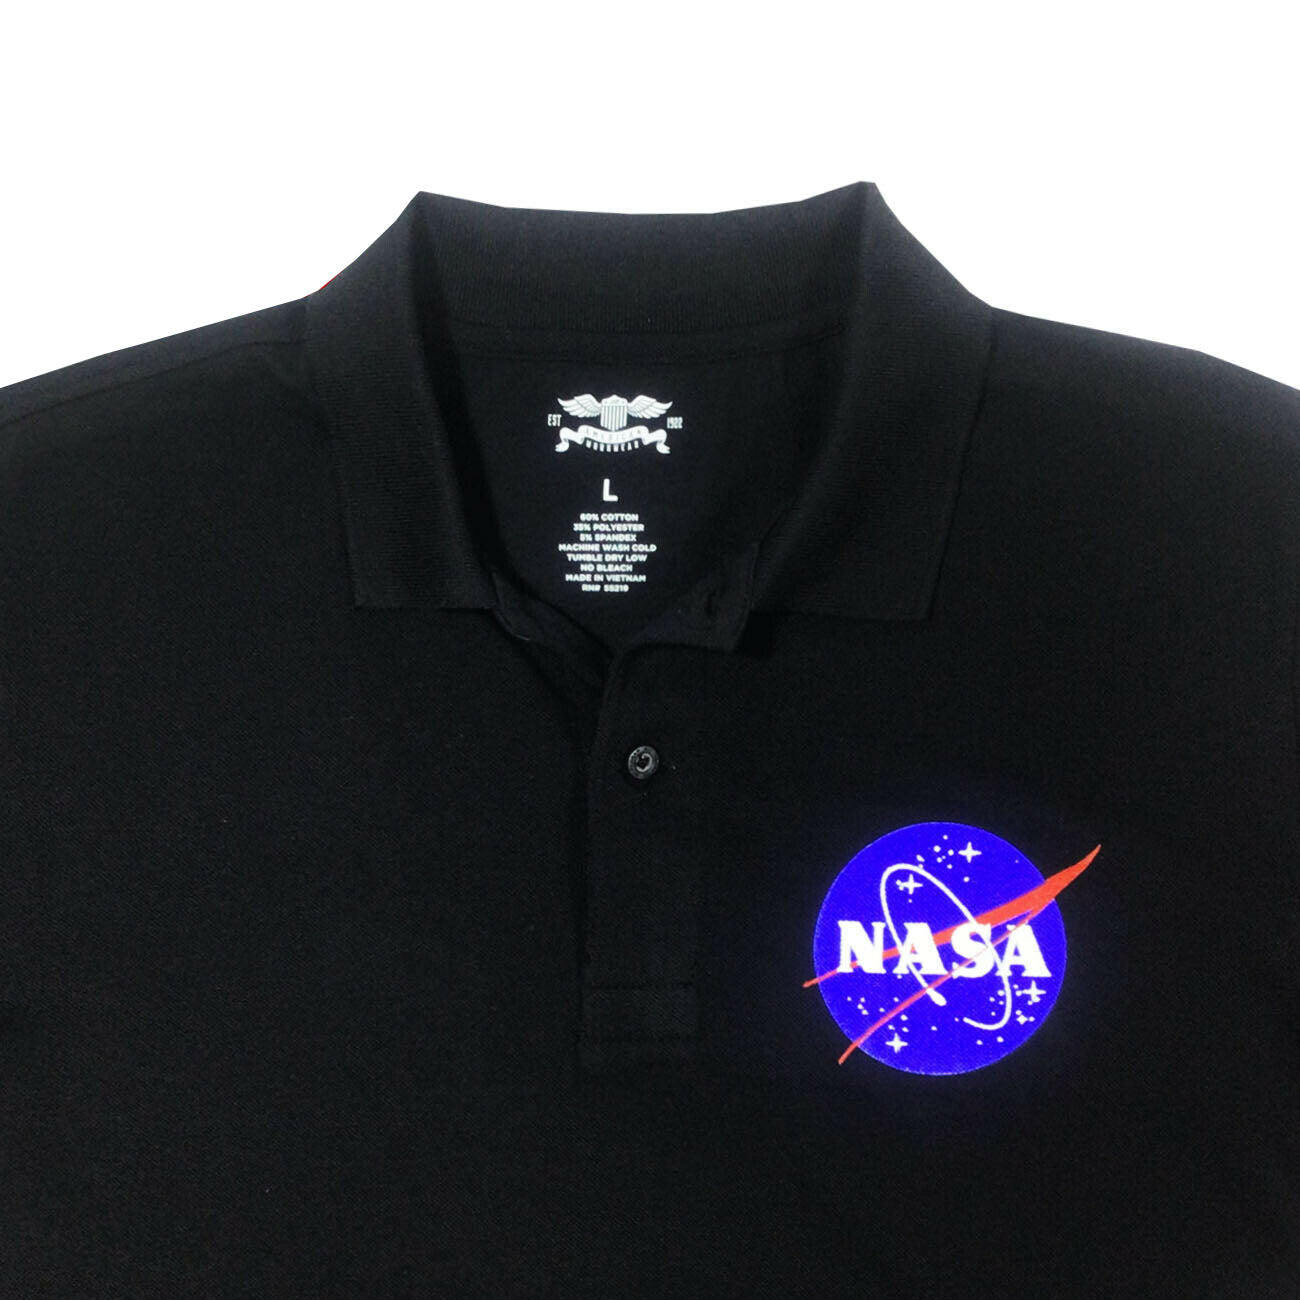 Men's Polo Shirt NASA 5% Spandex-All American Work Wear -Button Polo-Relaxed Fit SKY BLUE / WHITE / BLACK